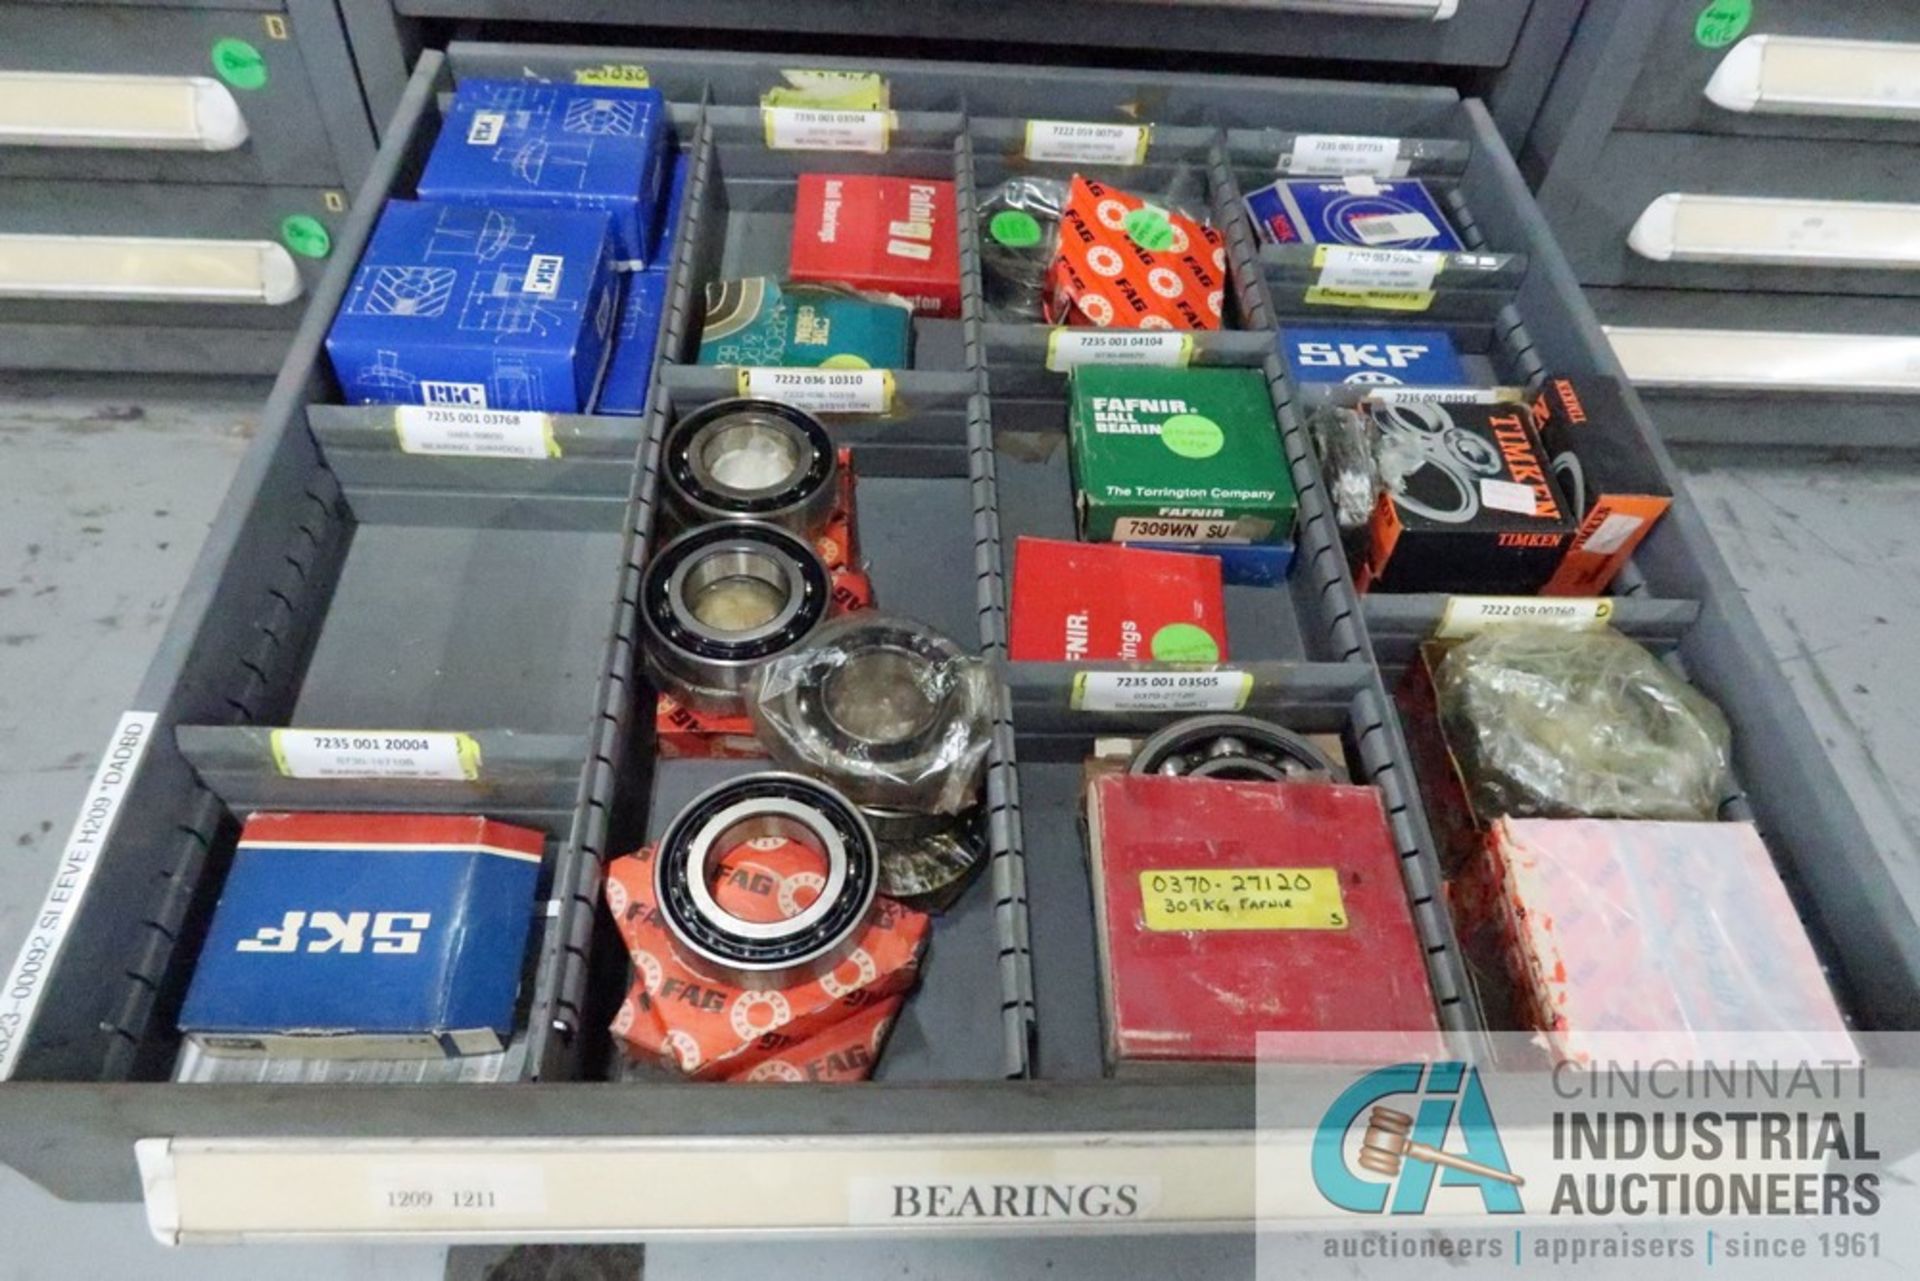 13-DRAWER VIDMAR CABINET WITH CONTENTS INCLUDING MISCELLANEOUS BEARINGS (CABINET CD) - Image 13 of 14